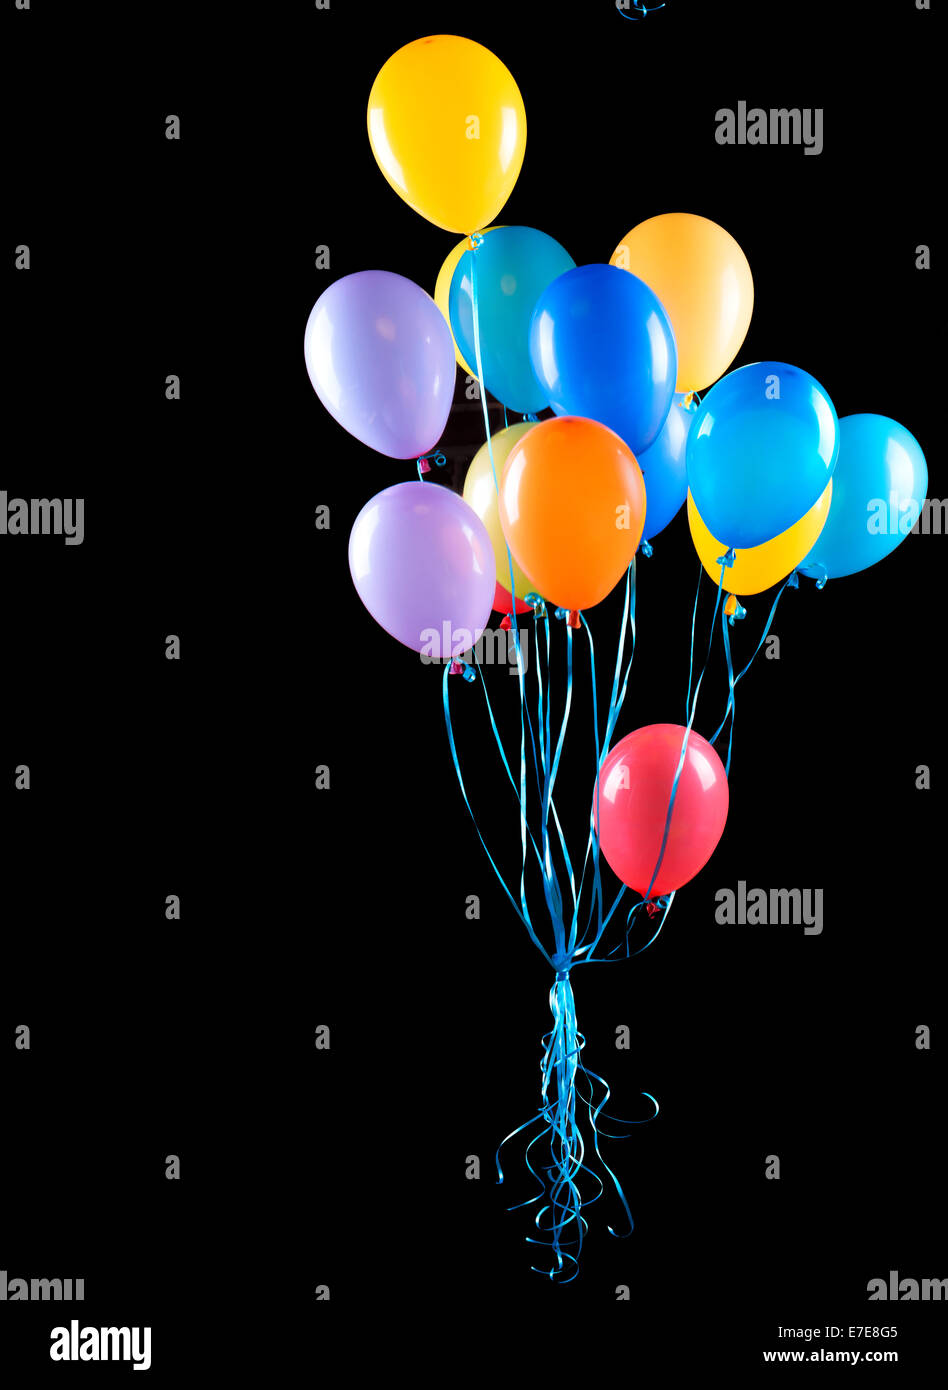 flying balloons isolated on a black background Stock Photo - Alamy